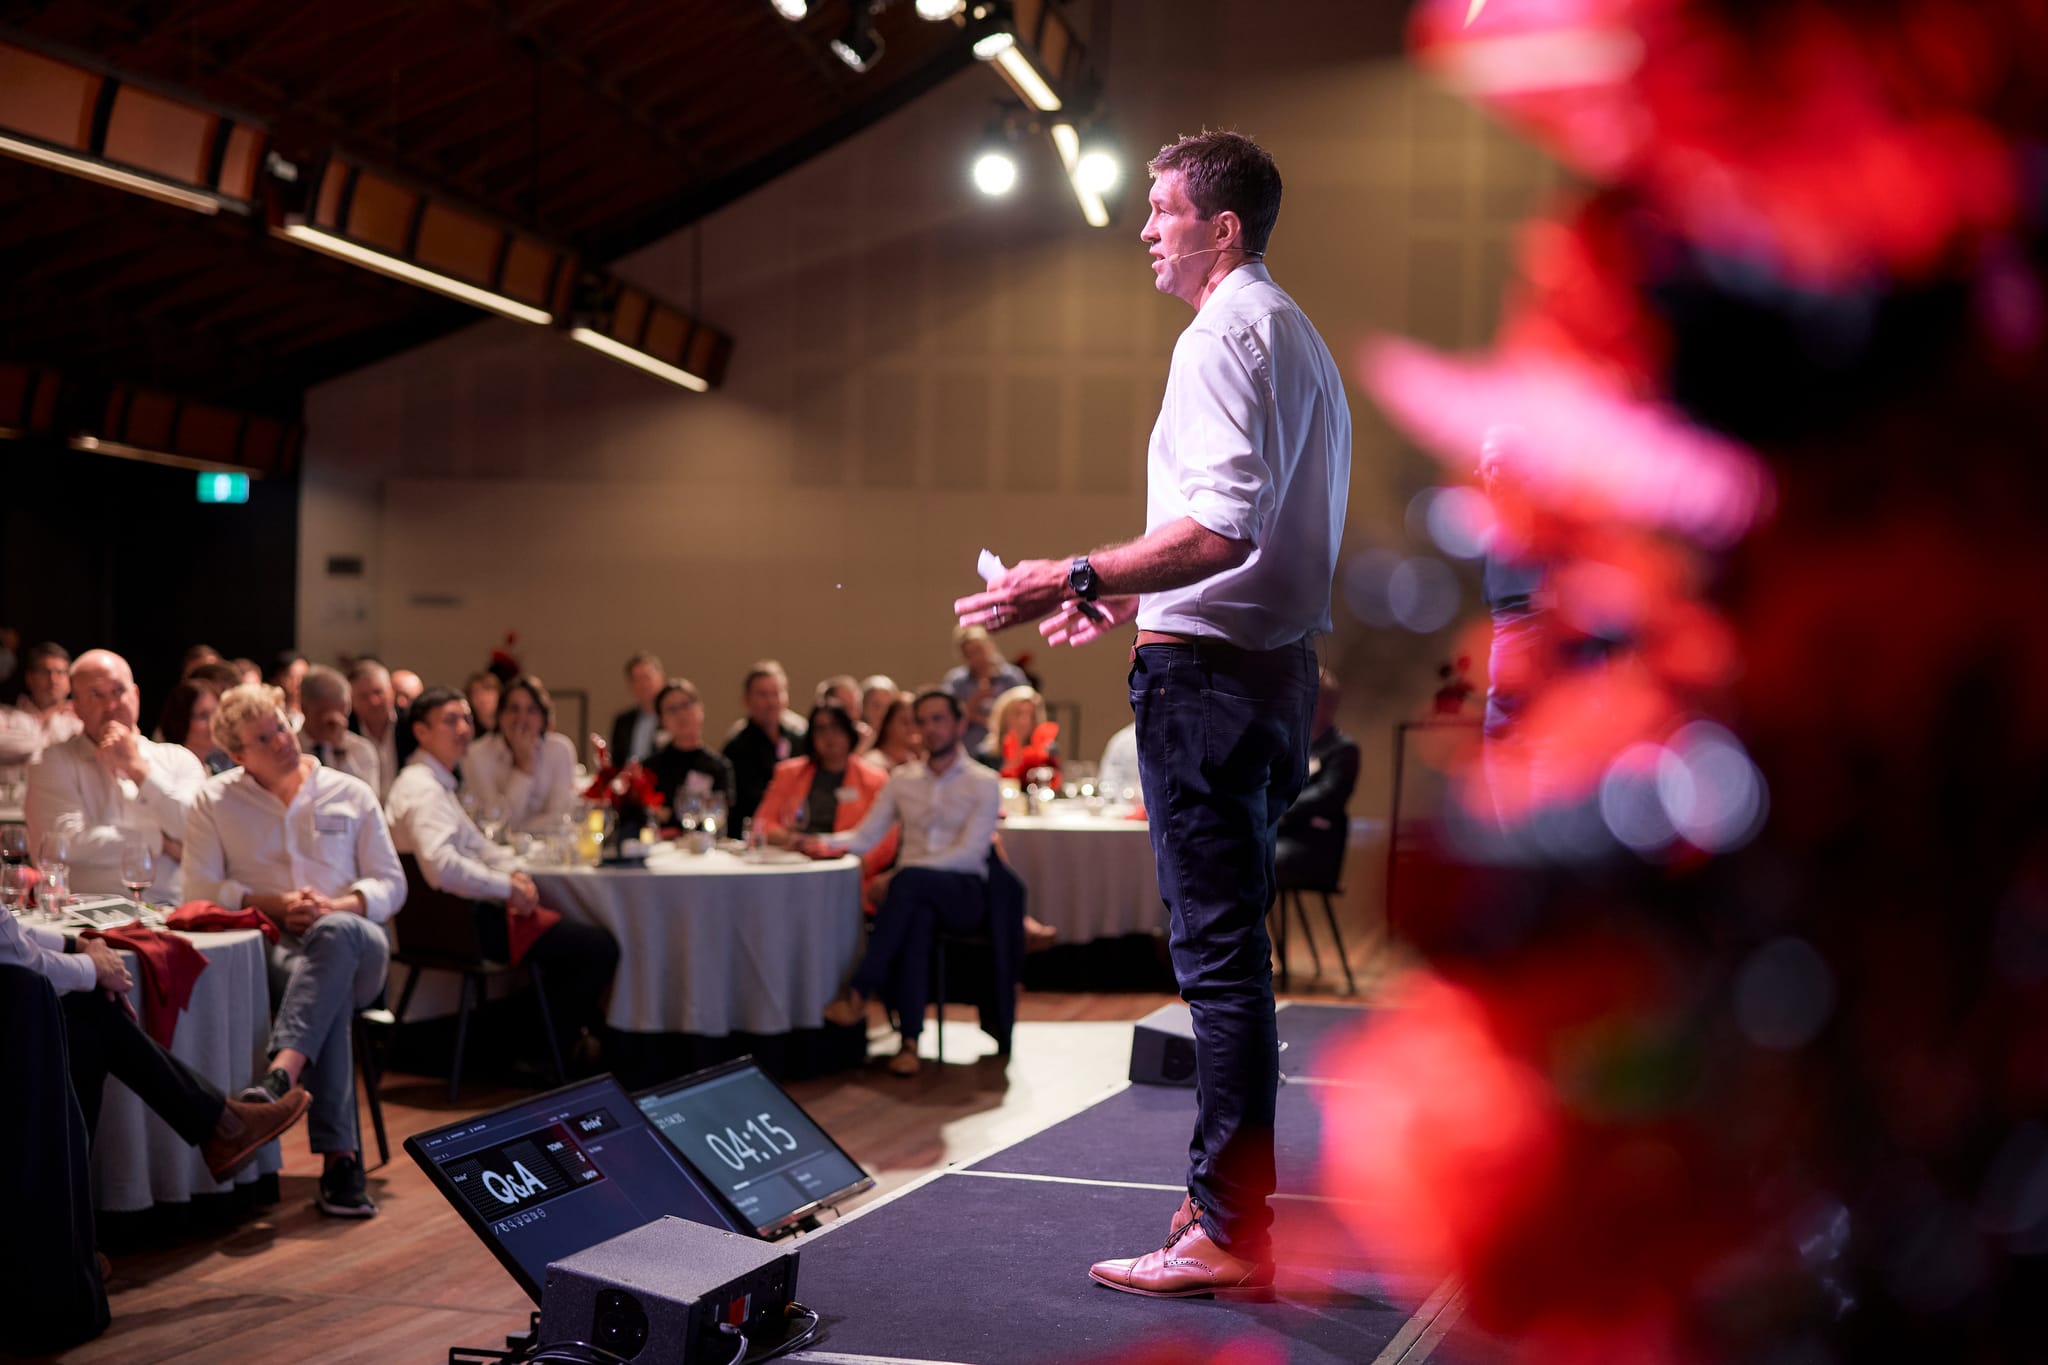 A tall man in a while shirt standing on a stage pitching to a room of people over dinner. 